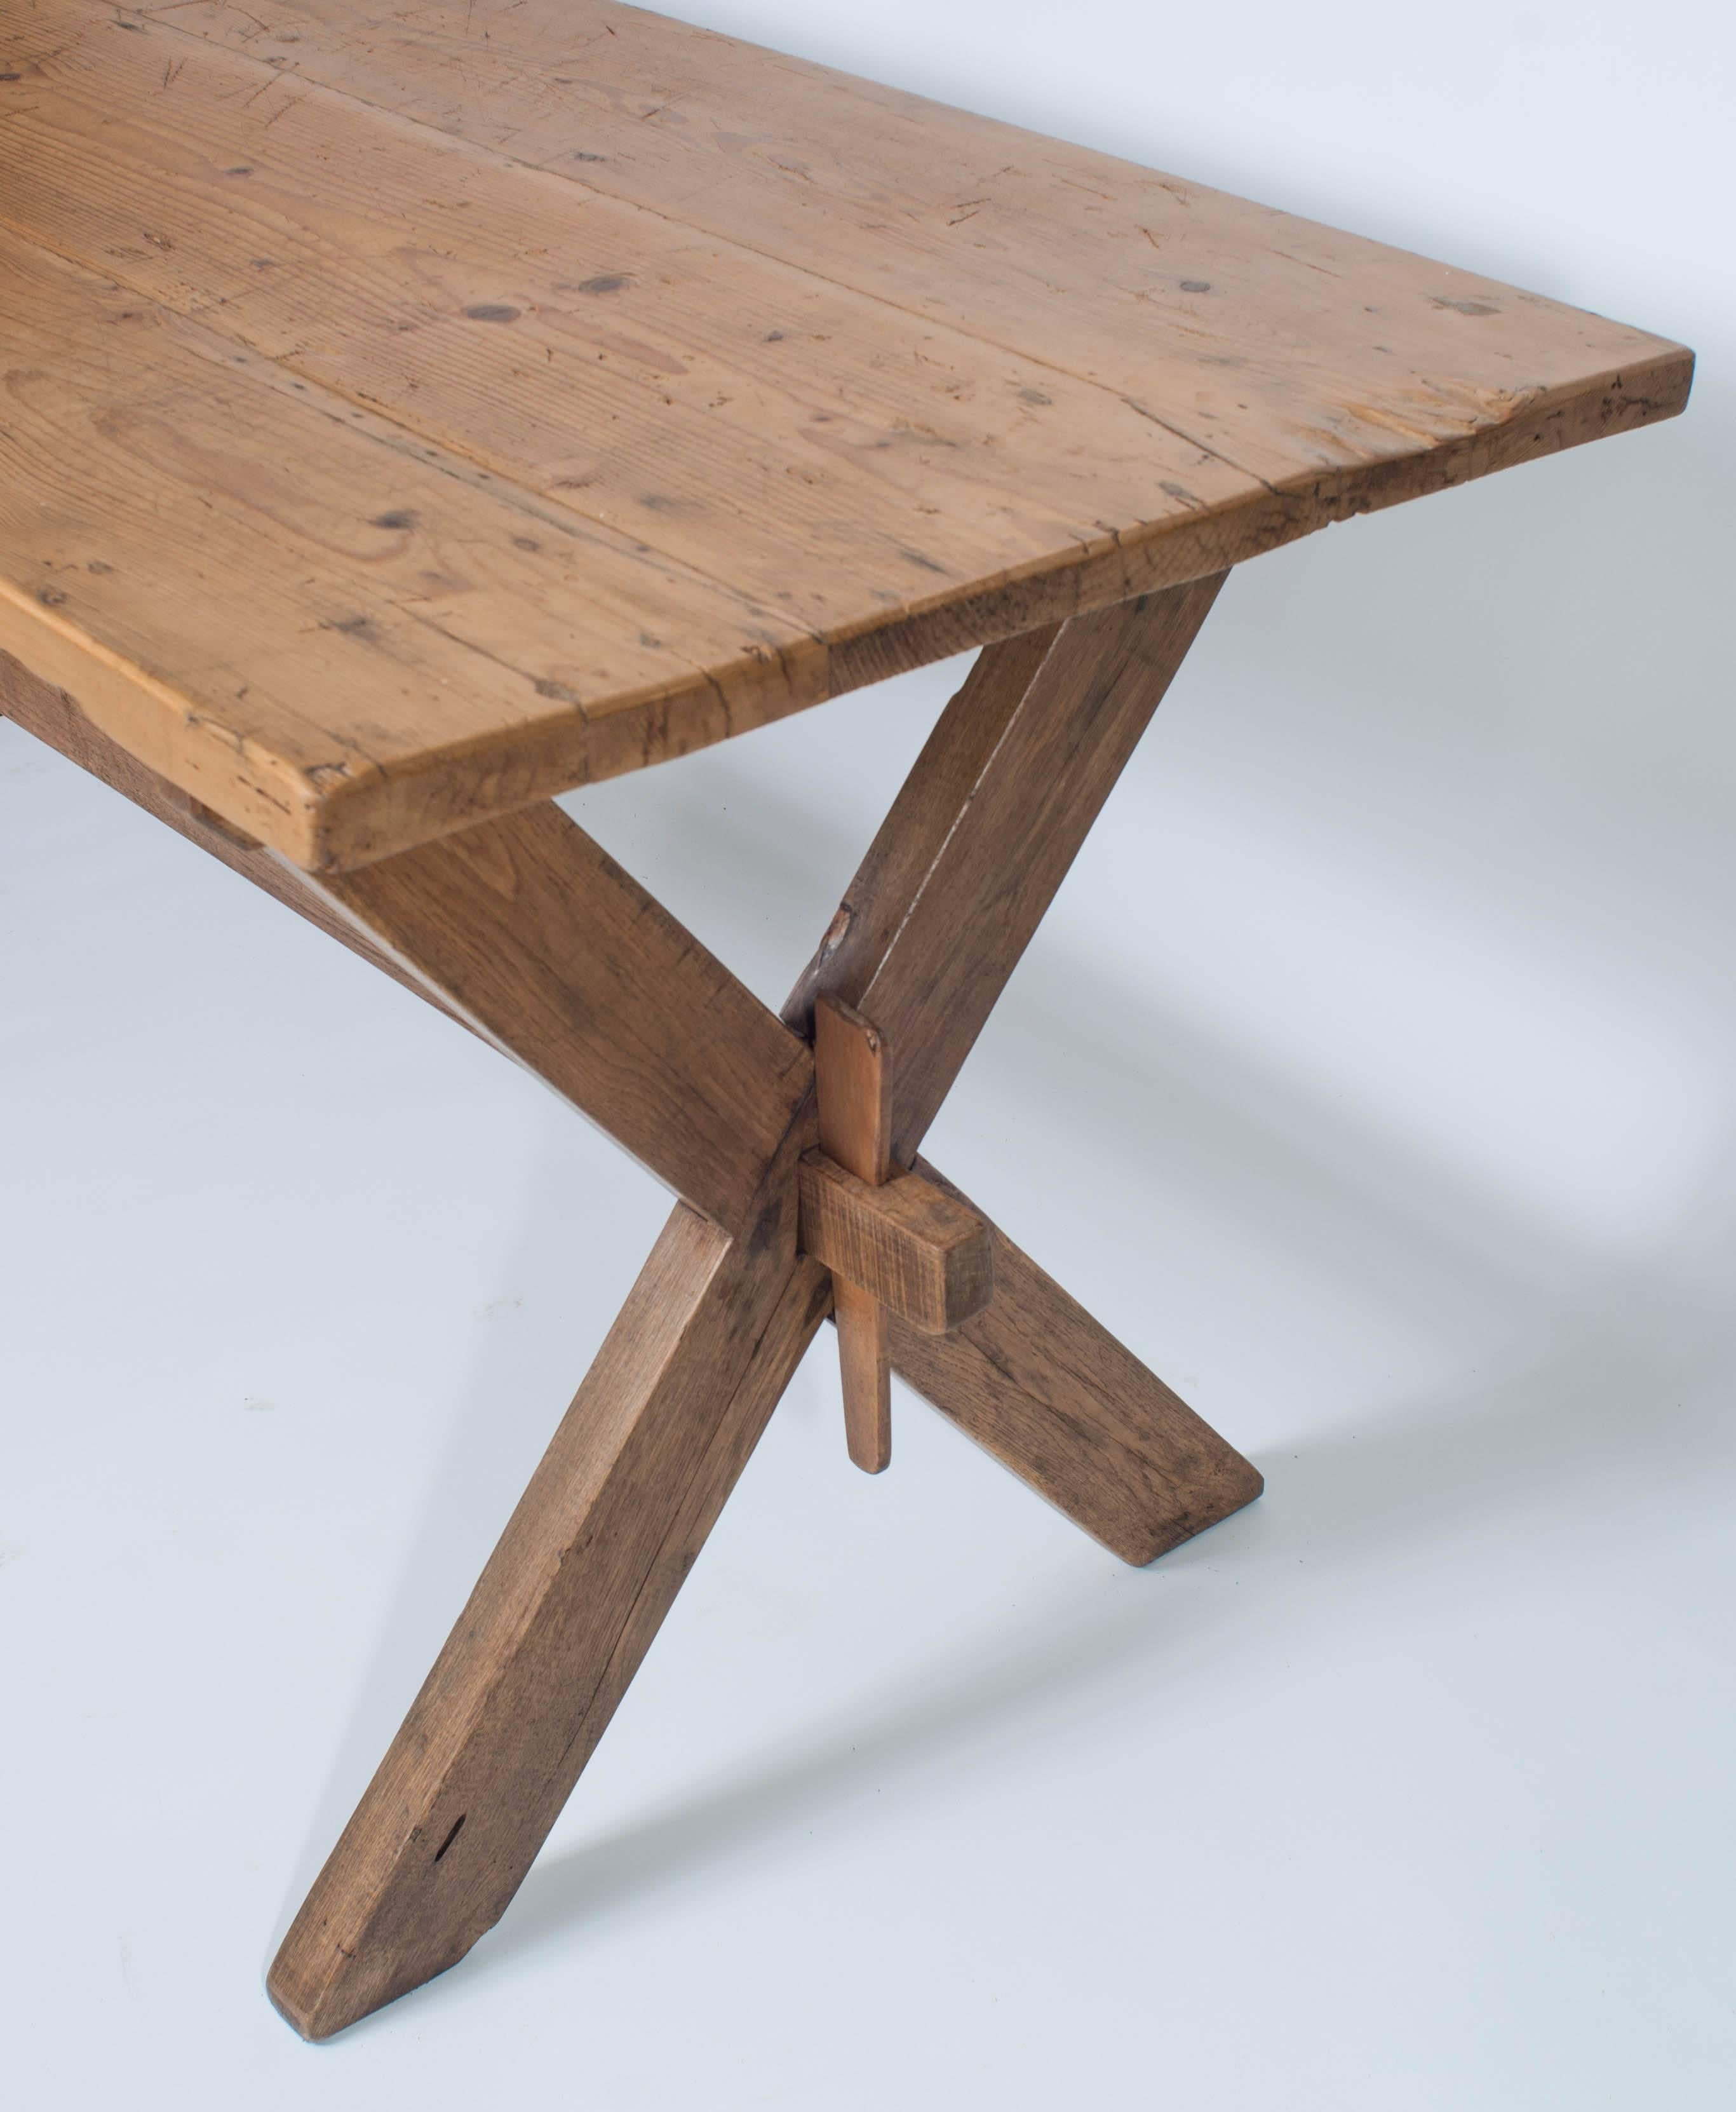 This beautiful table features a sawbucks style trestle base with central stretcher and original wooden keys in oak.  The three board top is in pine, almost 1.5